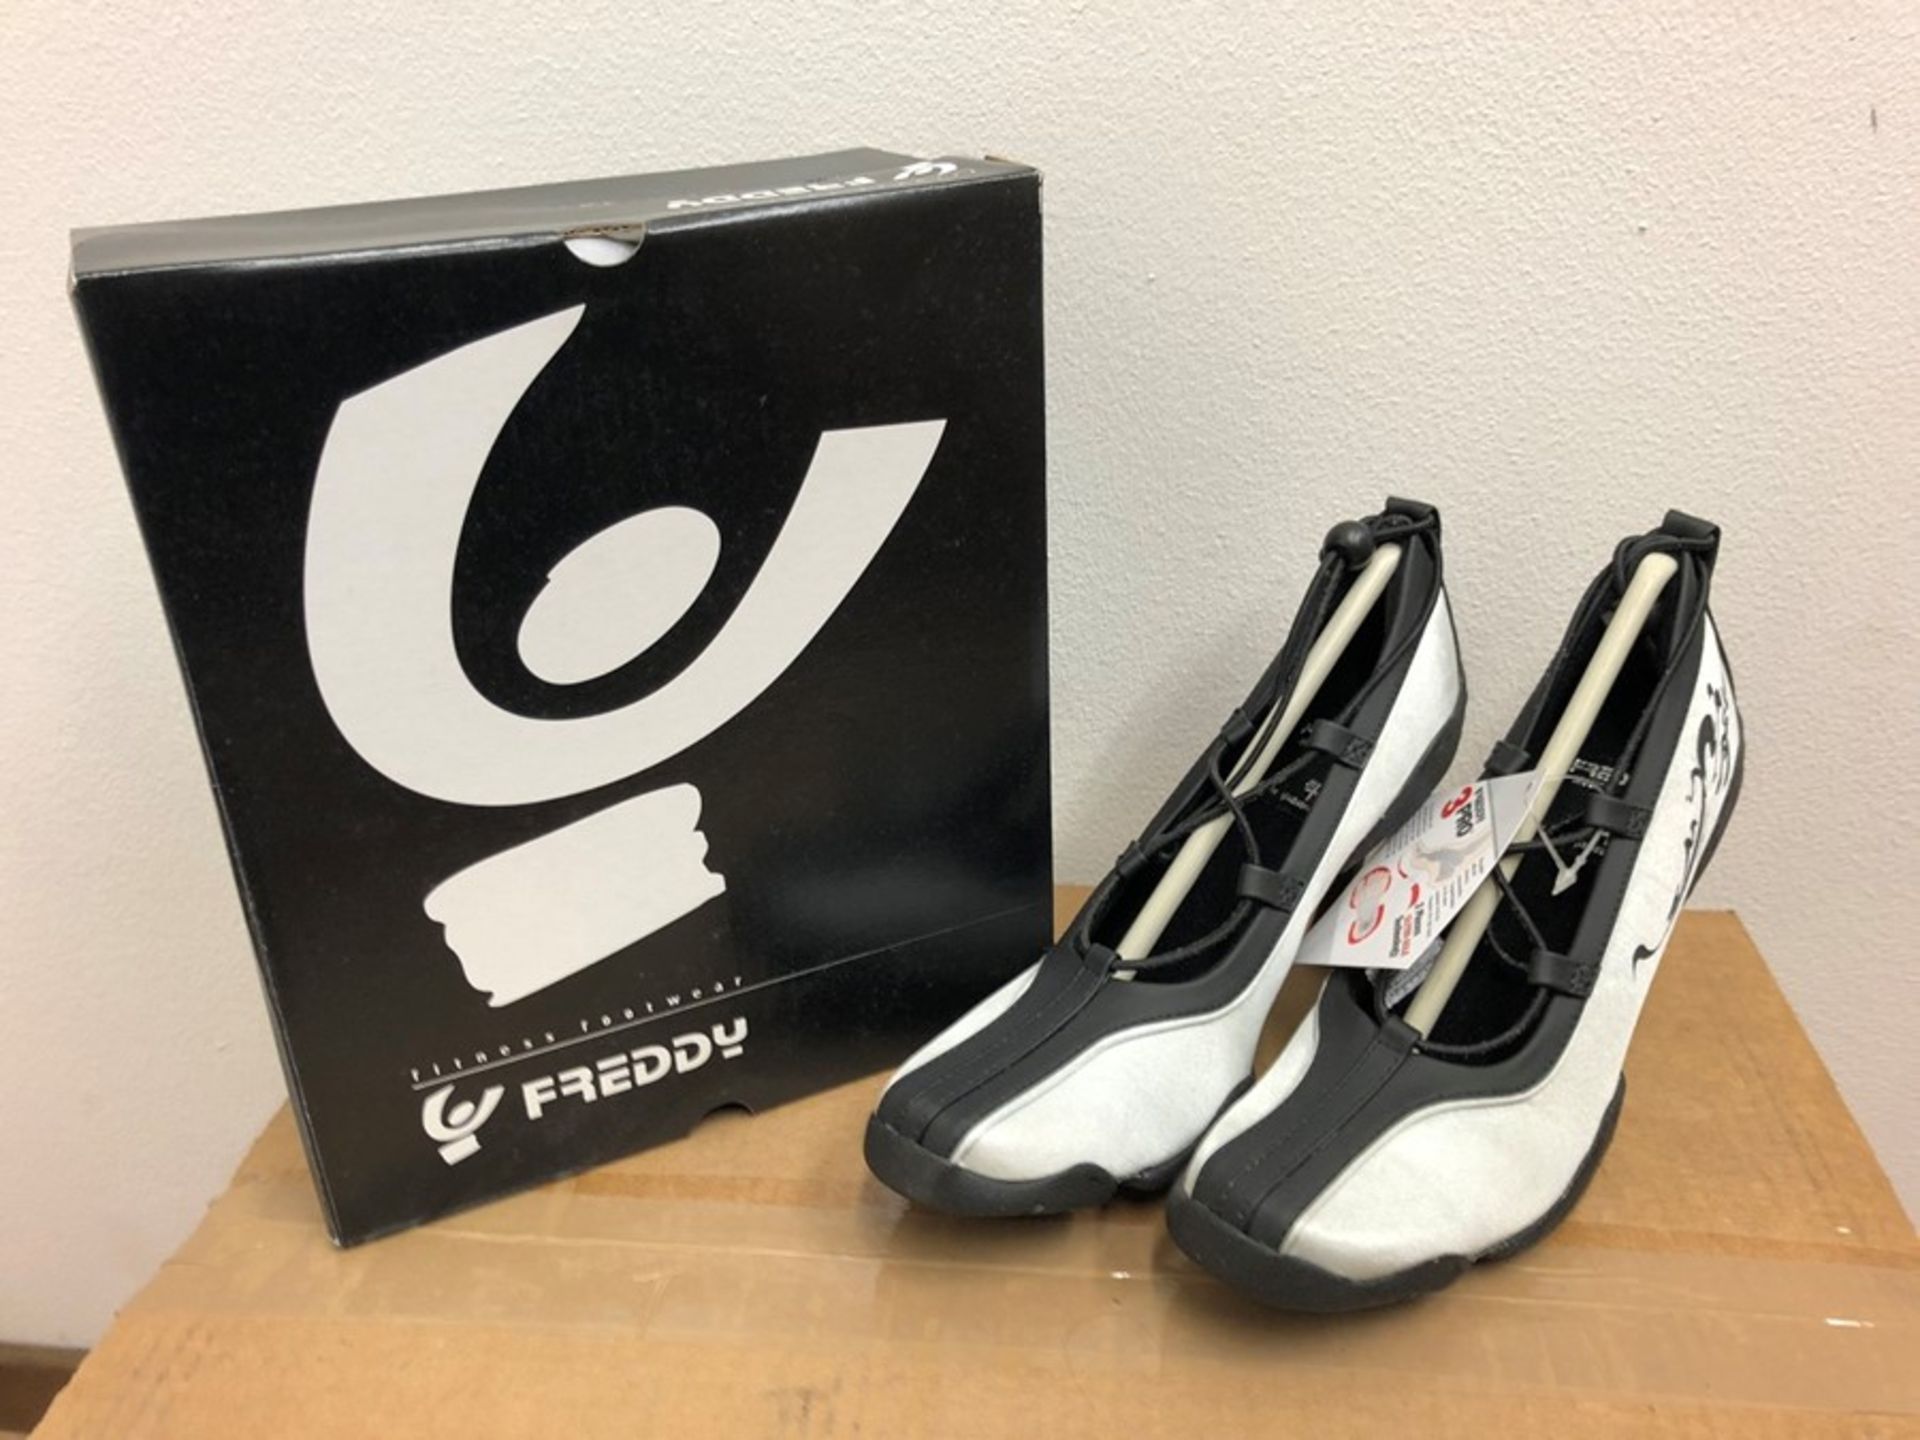 1 BOXED PAIR OF FREDDY 3 PRO FITNESS SPORTS HEELS IN SILVER AND BLACK / SIZE 5 IN LADIES / RRP £80.